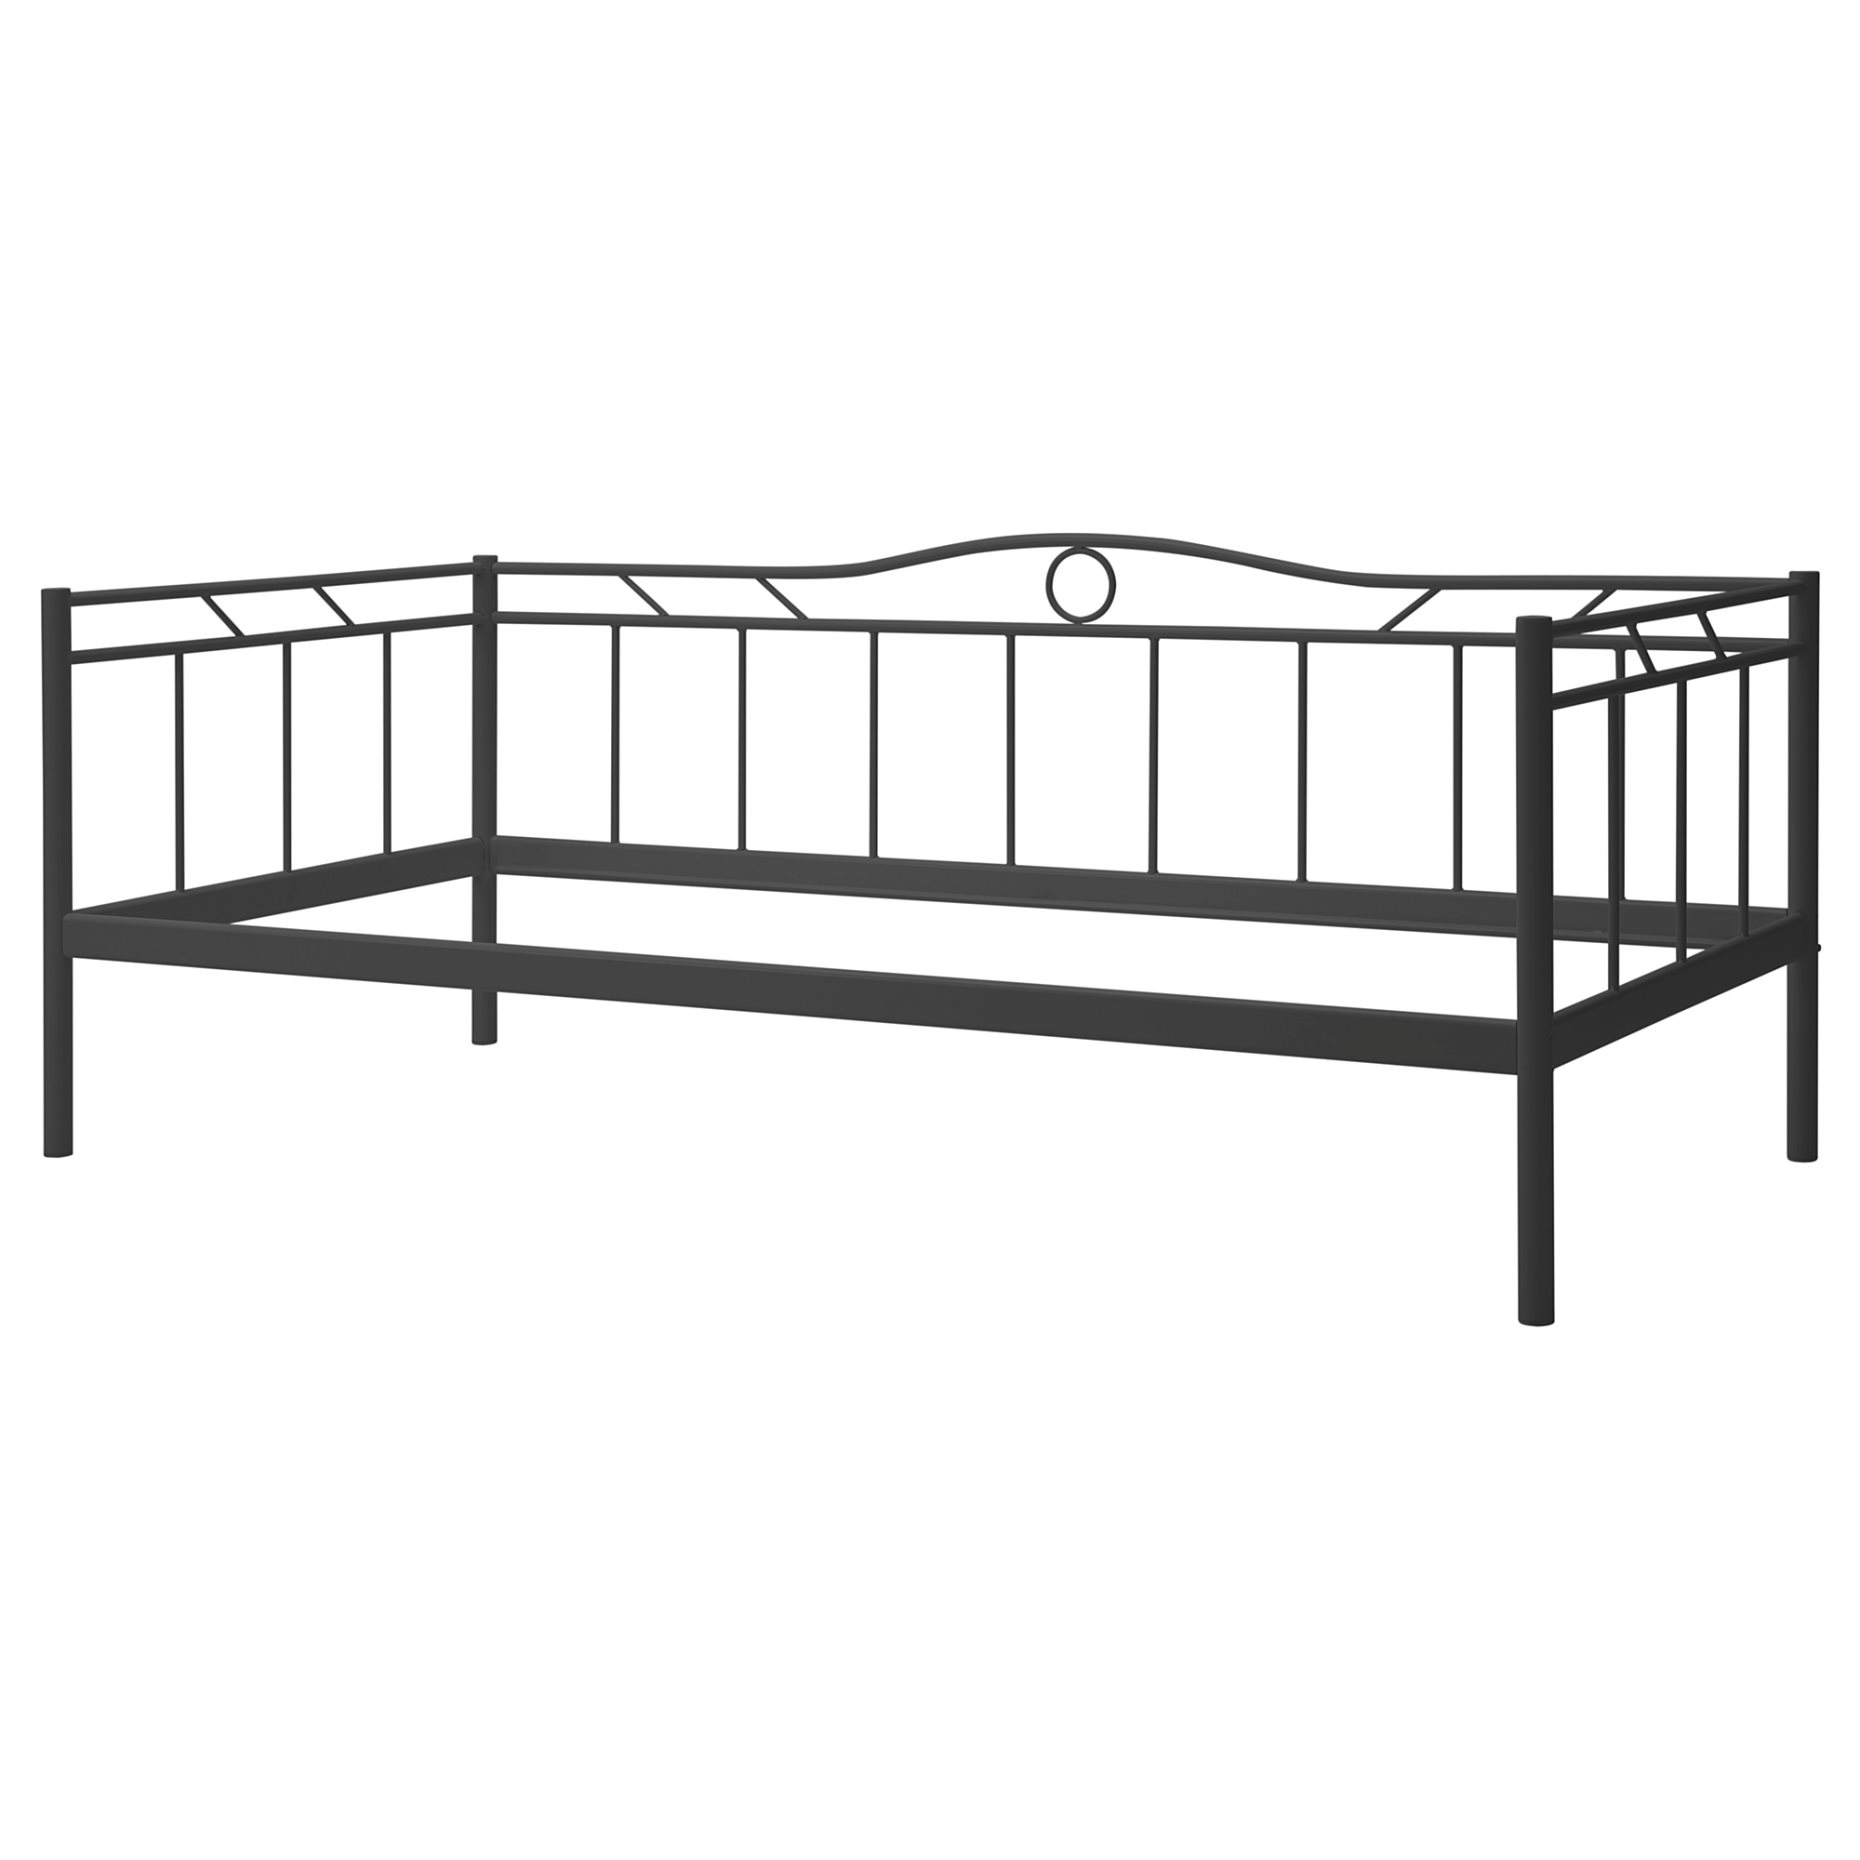 RAMSTA, day-bed frame with slatted bed base, 90X200 cm, 592.927.42